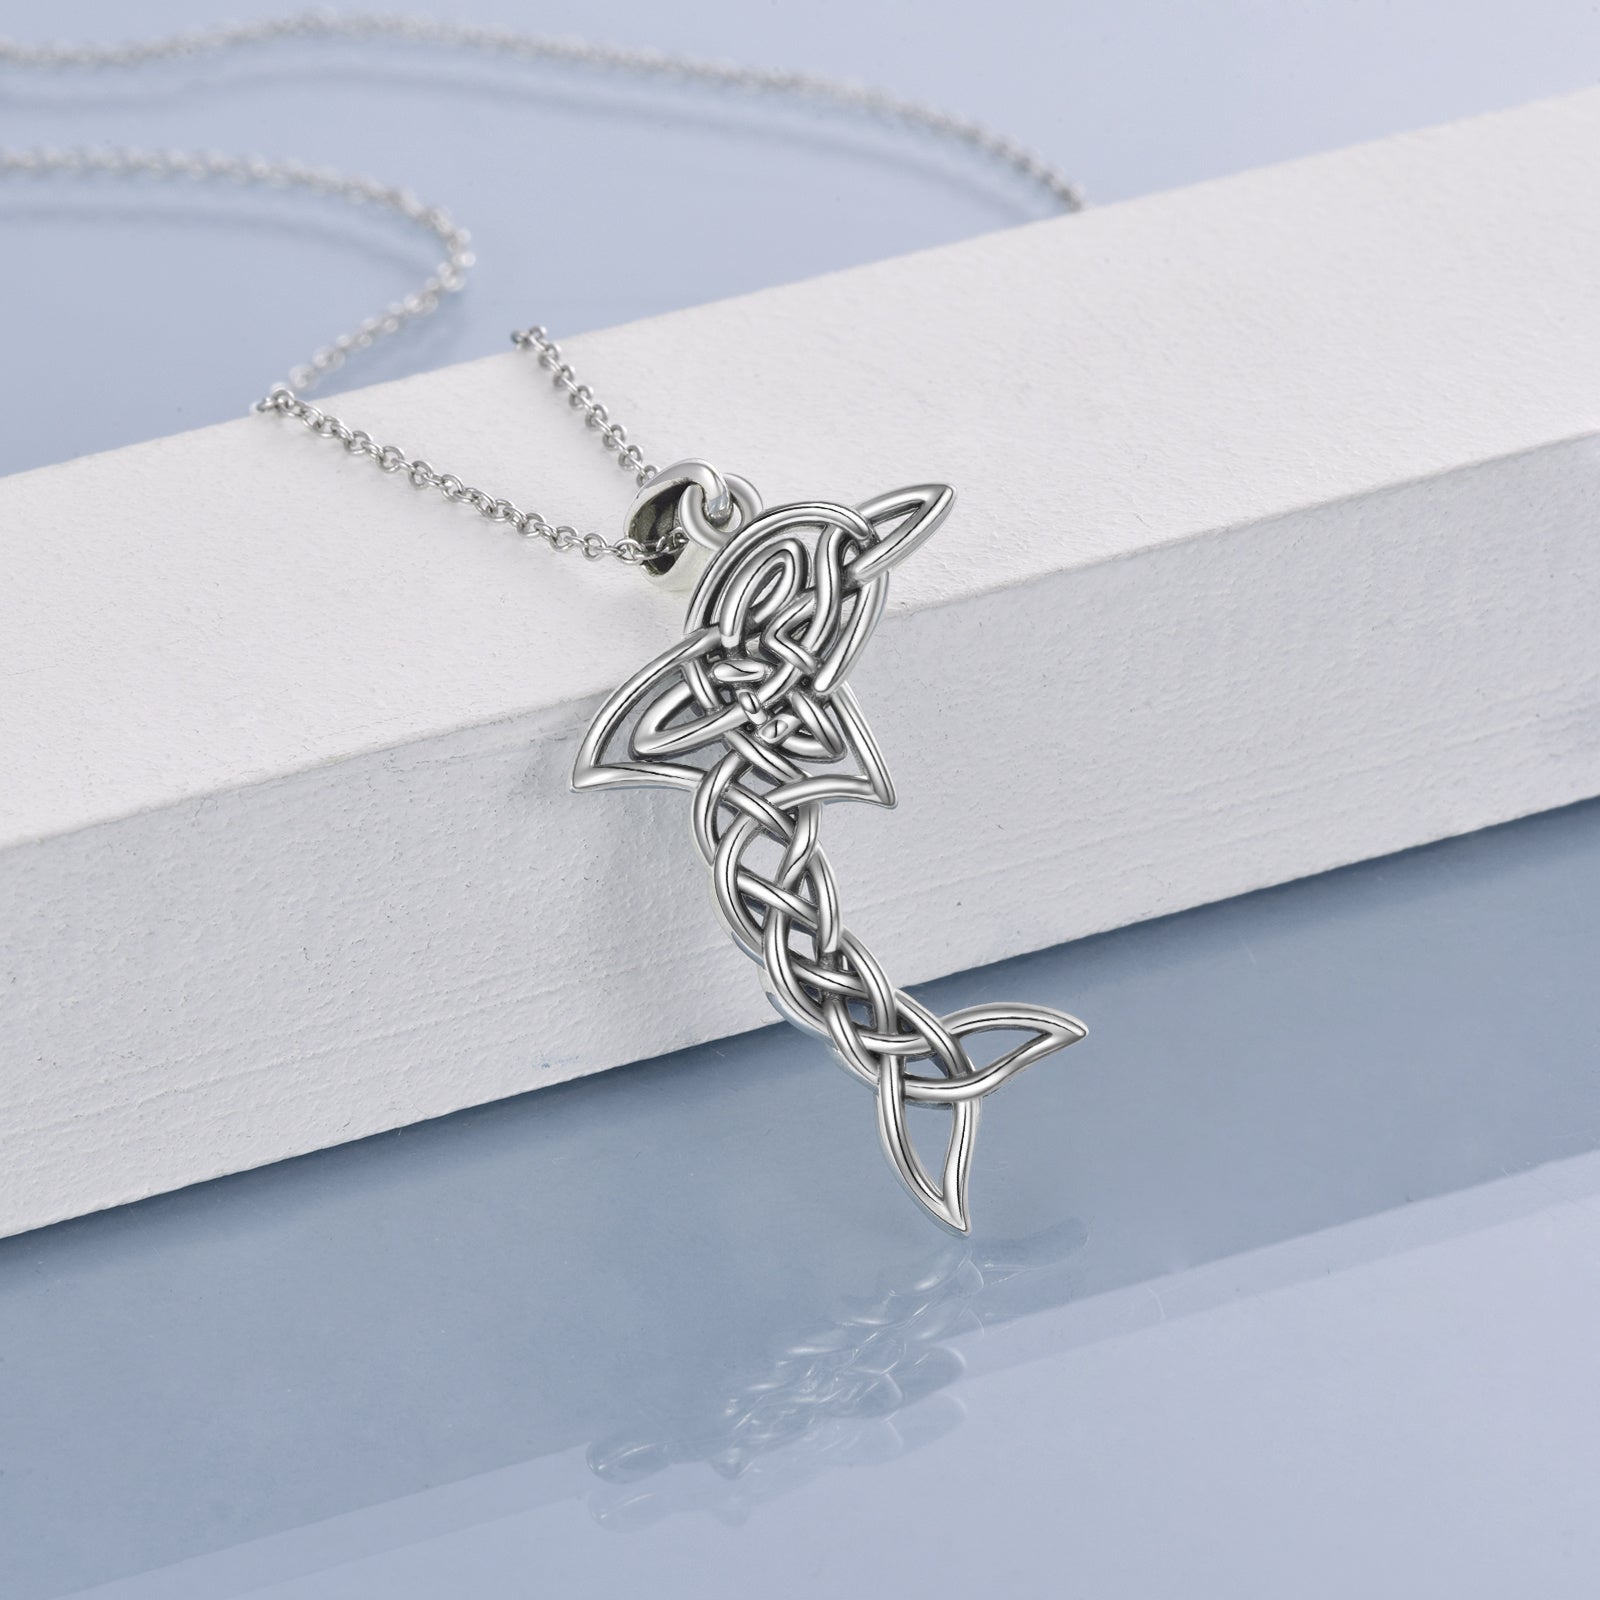 S925 Sterling Silver Celtic Knot Dolphin Pendant Necklace